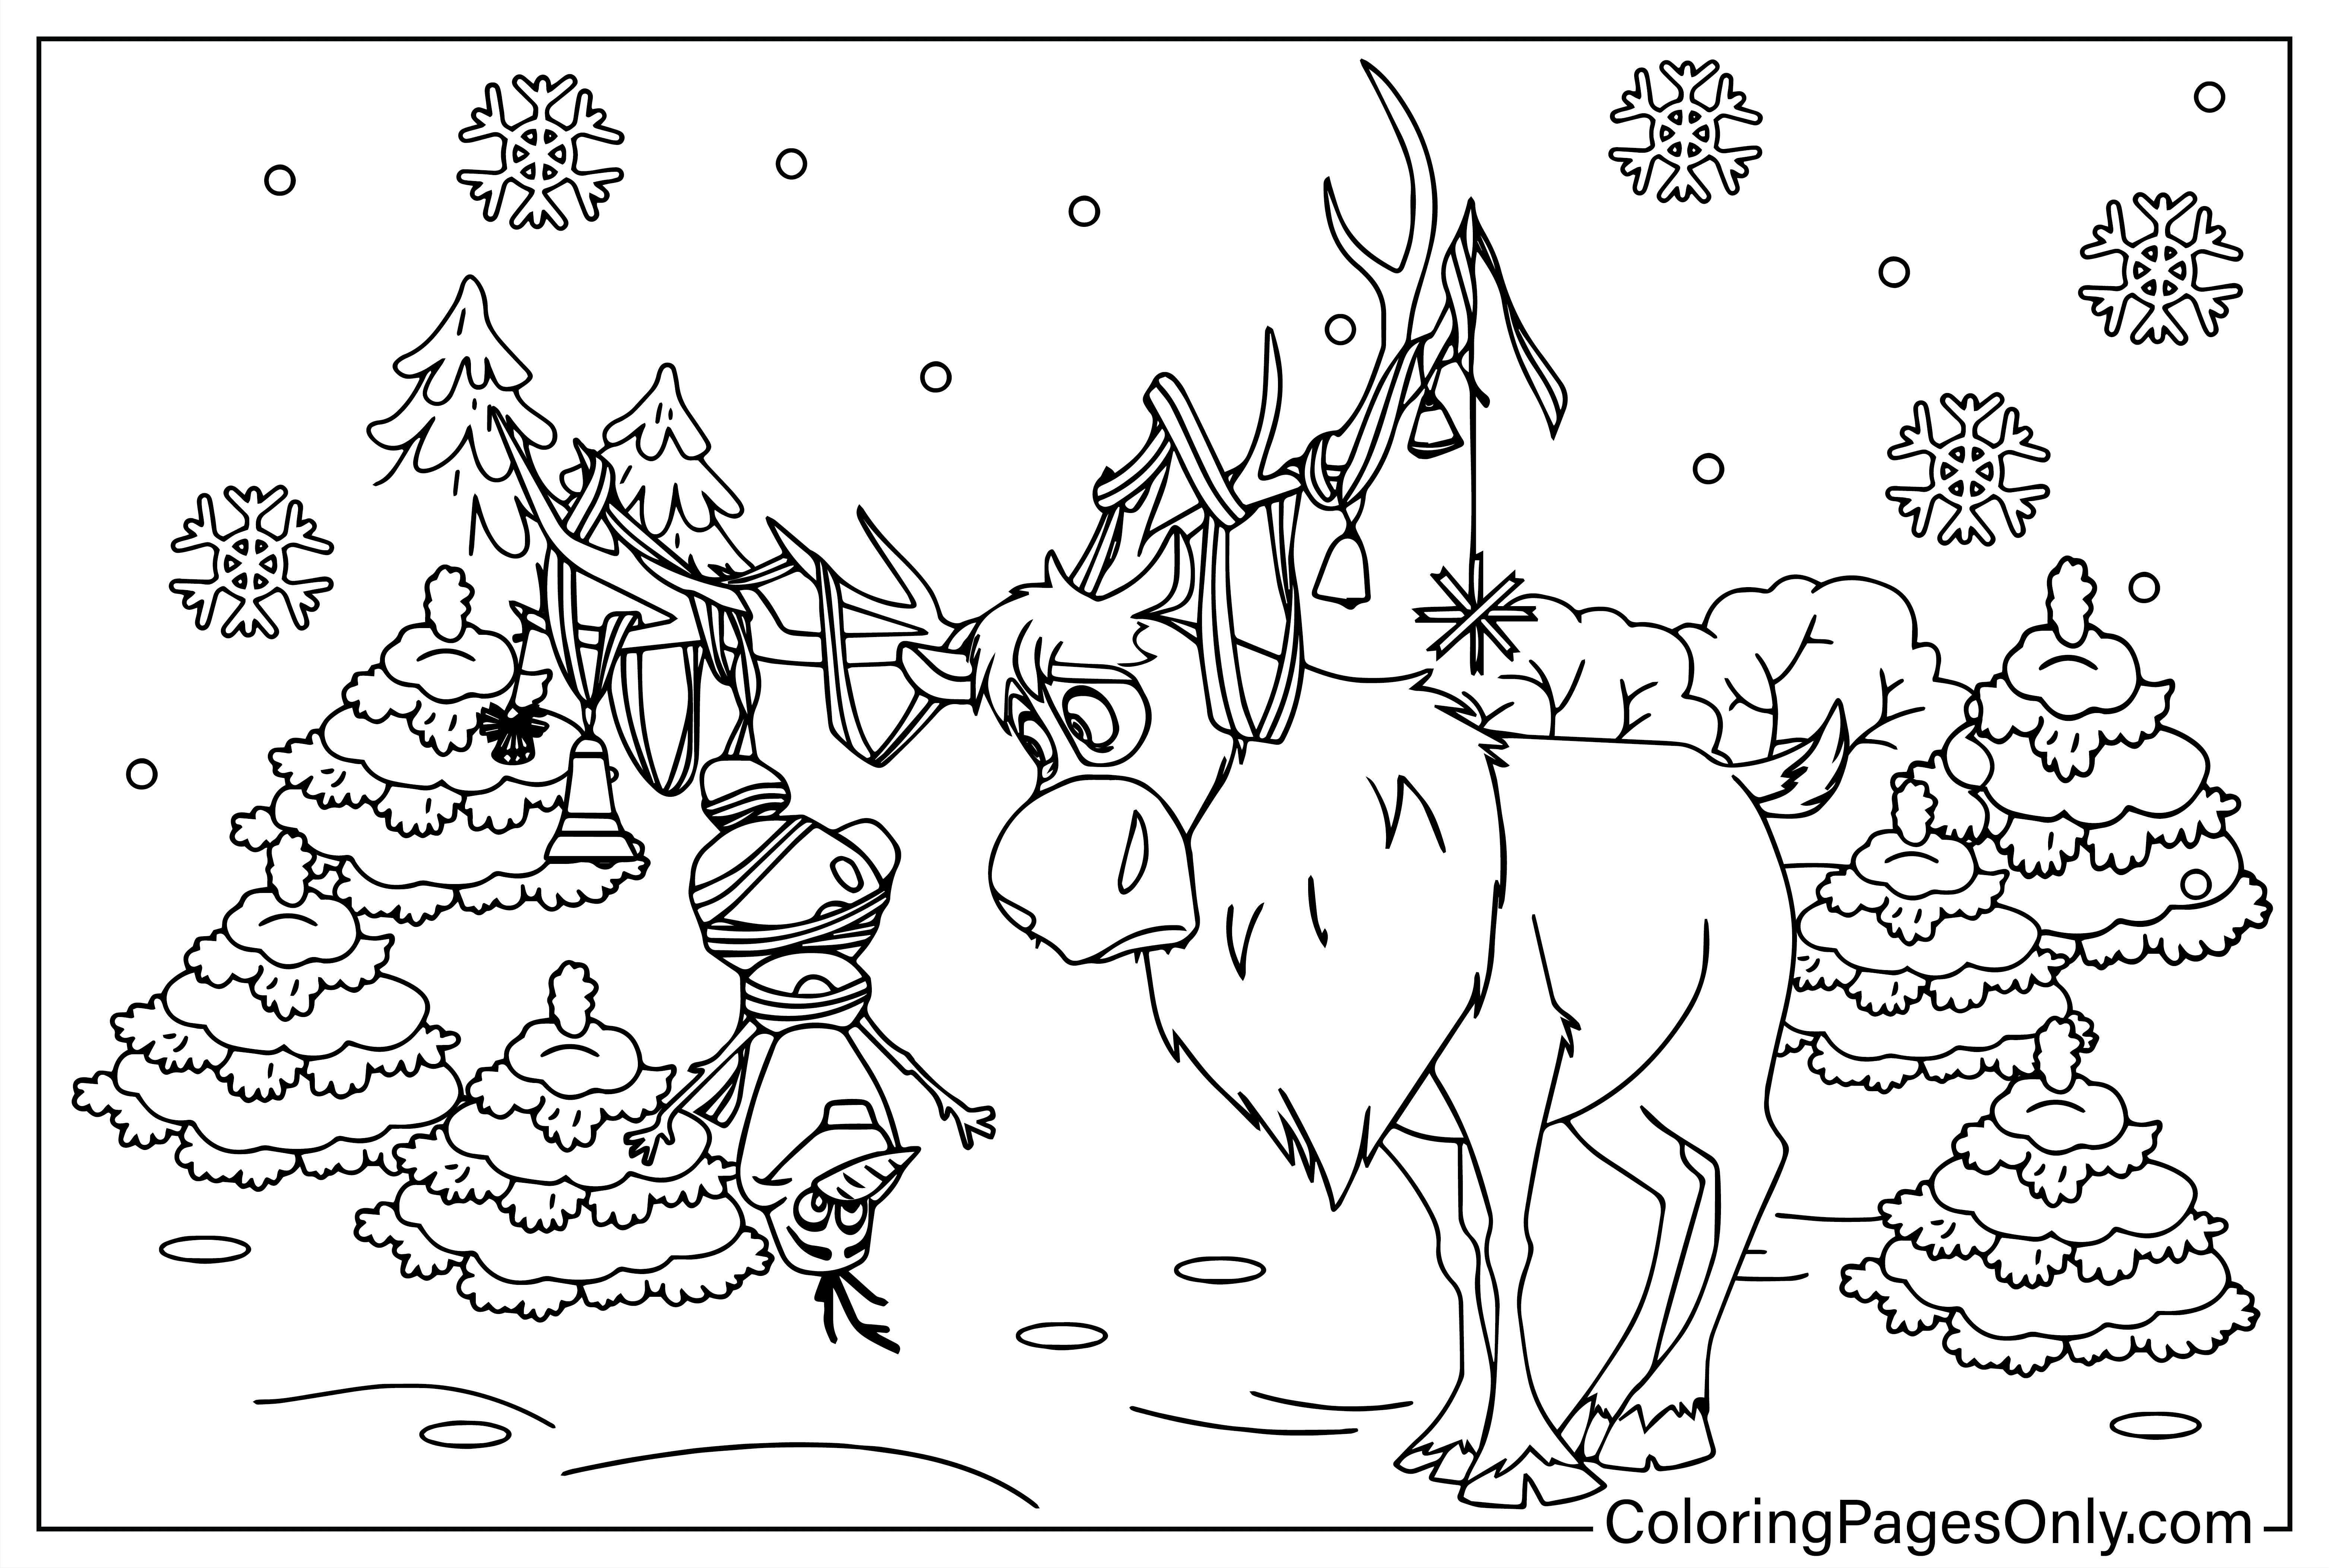 Olaf and Sven Coloring Page